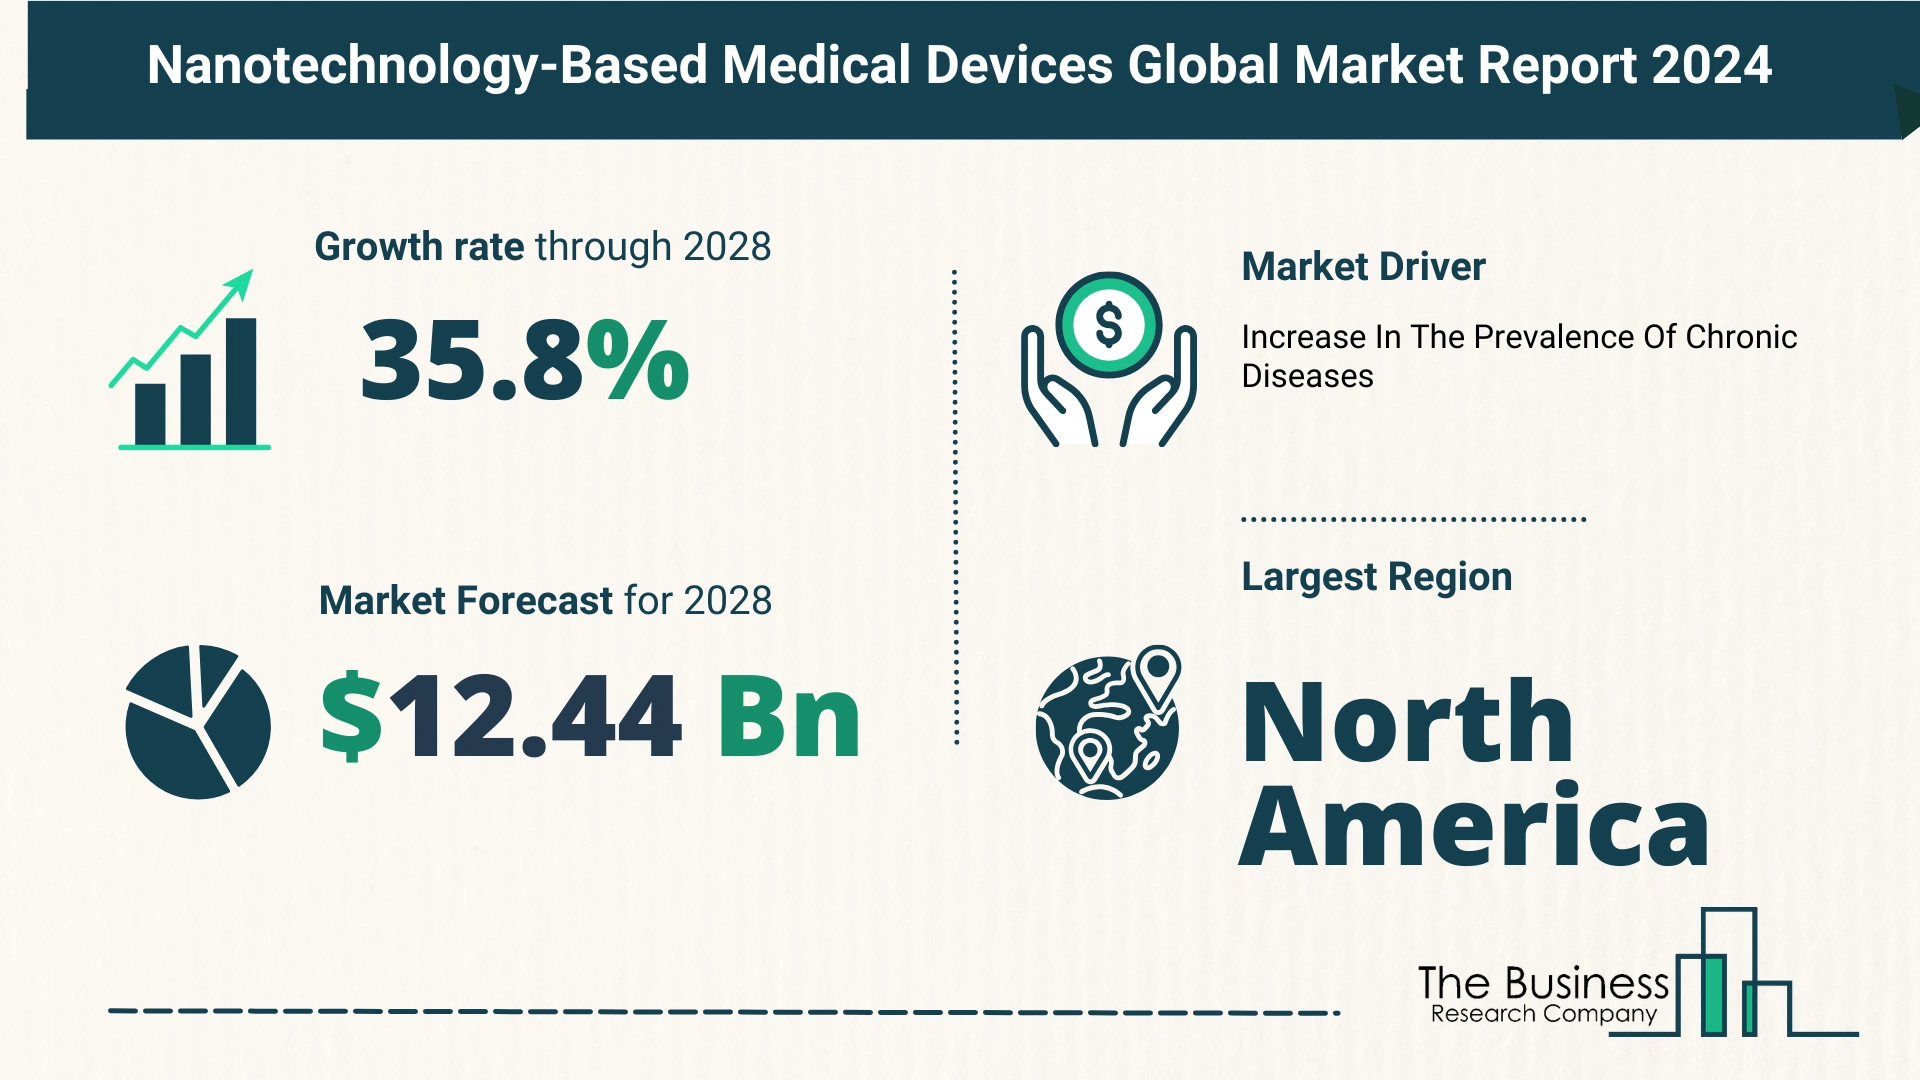 Key Takeaways From The Global Nanotechnology-Based Medical Devices Market Forecast 2024